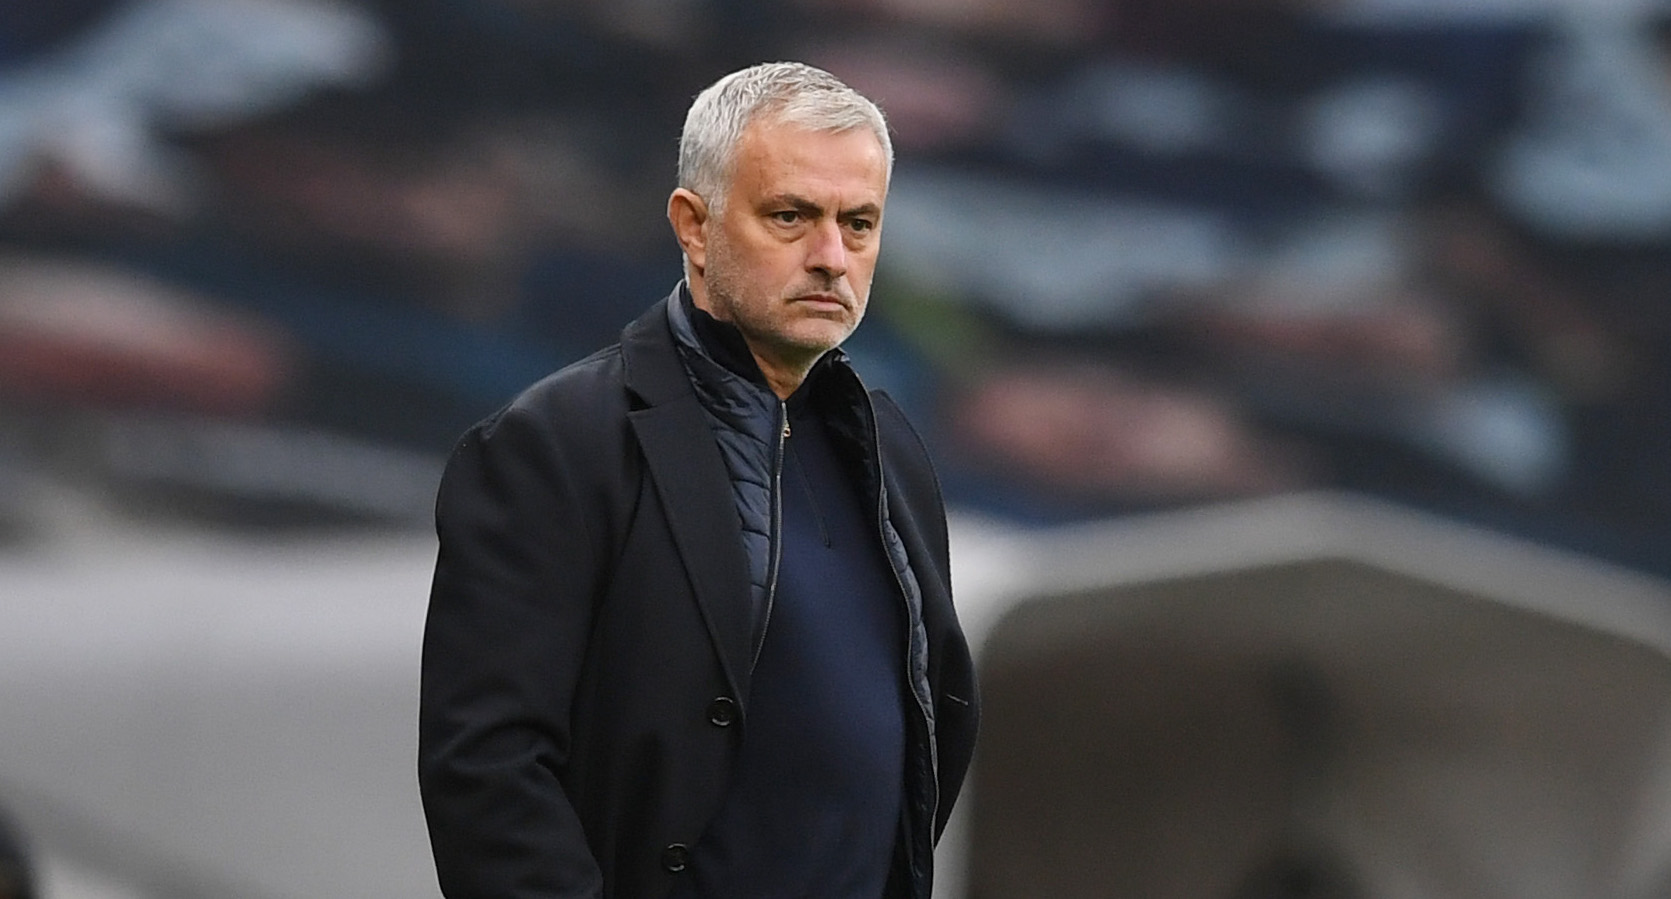 VAR cannot be making the same mistakes as a human being, asserts Jose Mourinho